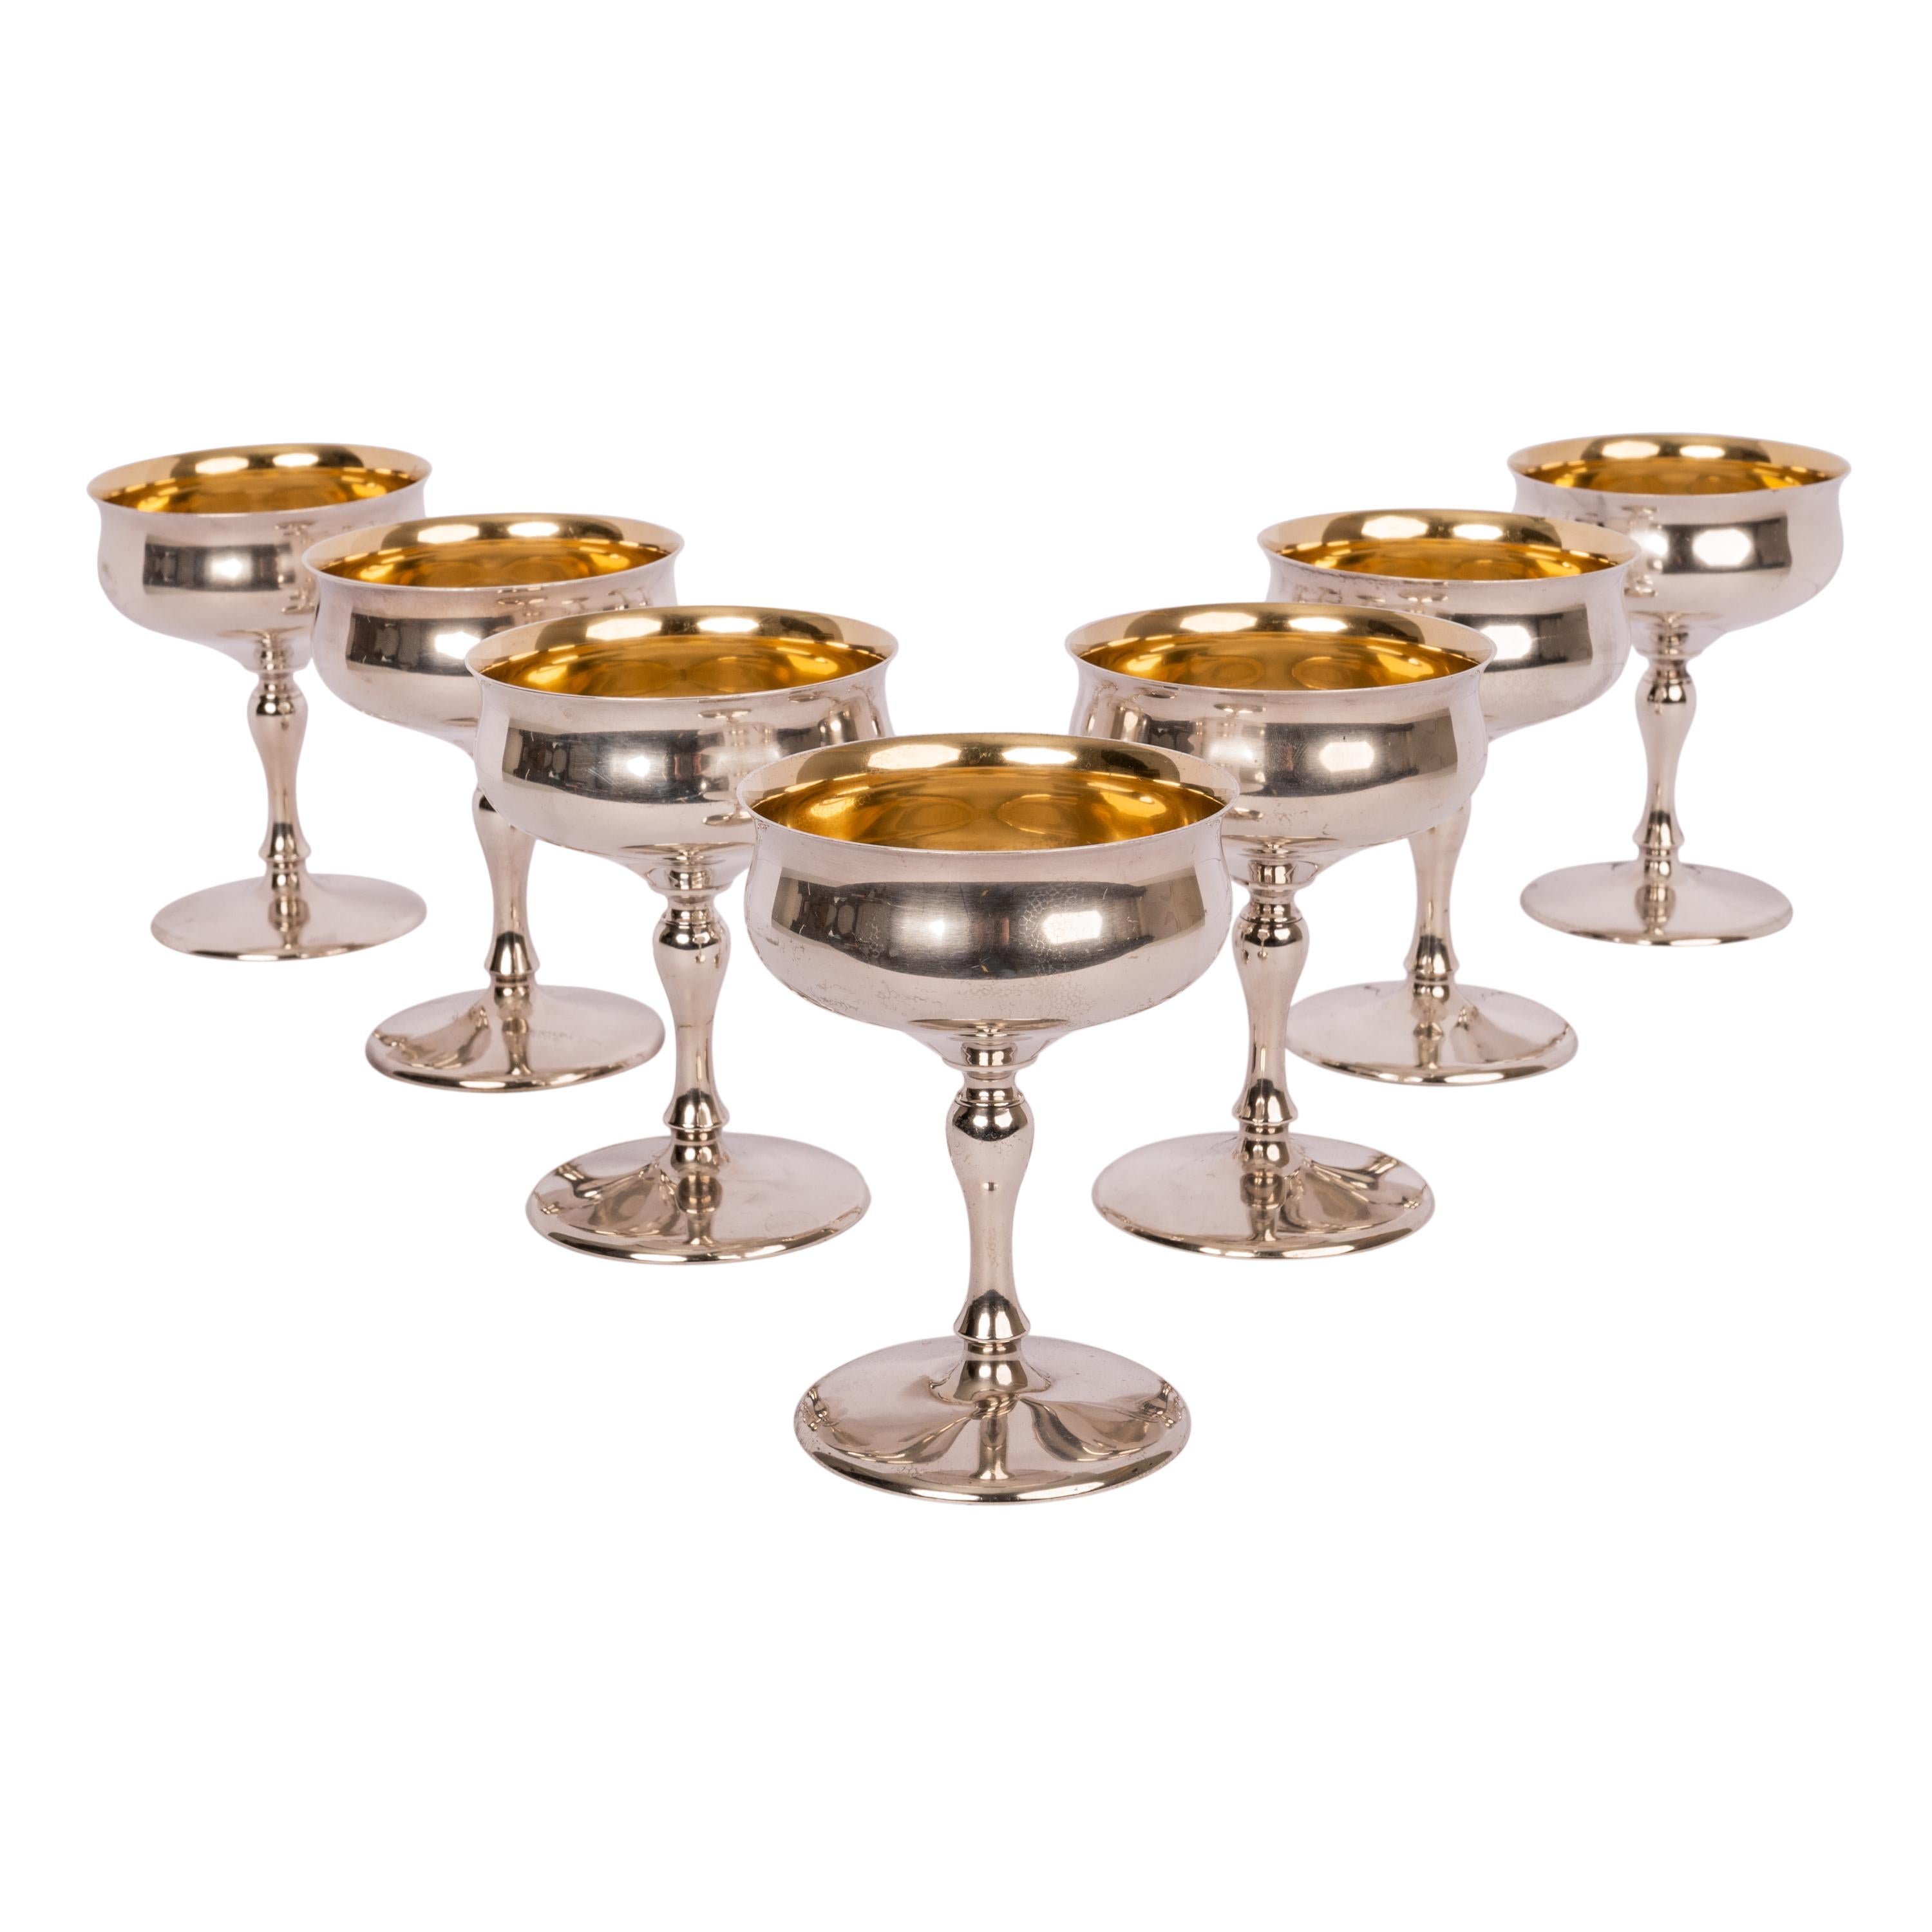 A good set of antique American sterling silver gilt sherbets/ wine goblets, by Reed & Barton, circa 1928.
Each goblet is made of solid sterling silver with a flared bowl and having gilt interiors, the goblets are raised on baluster shaped stems and